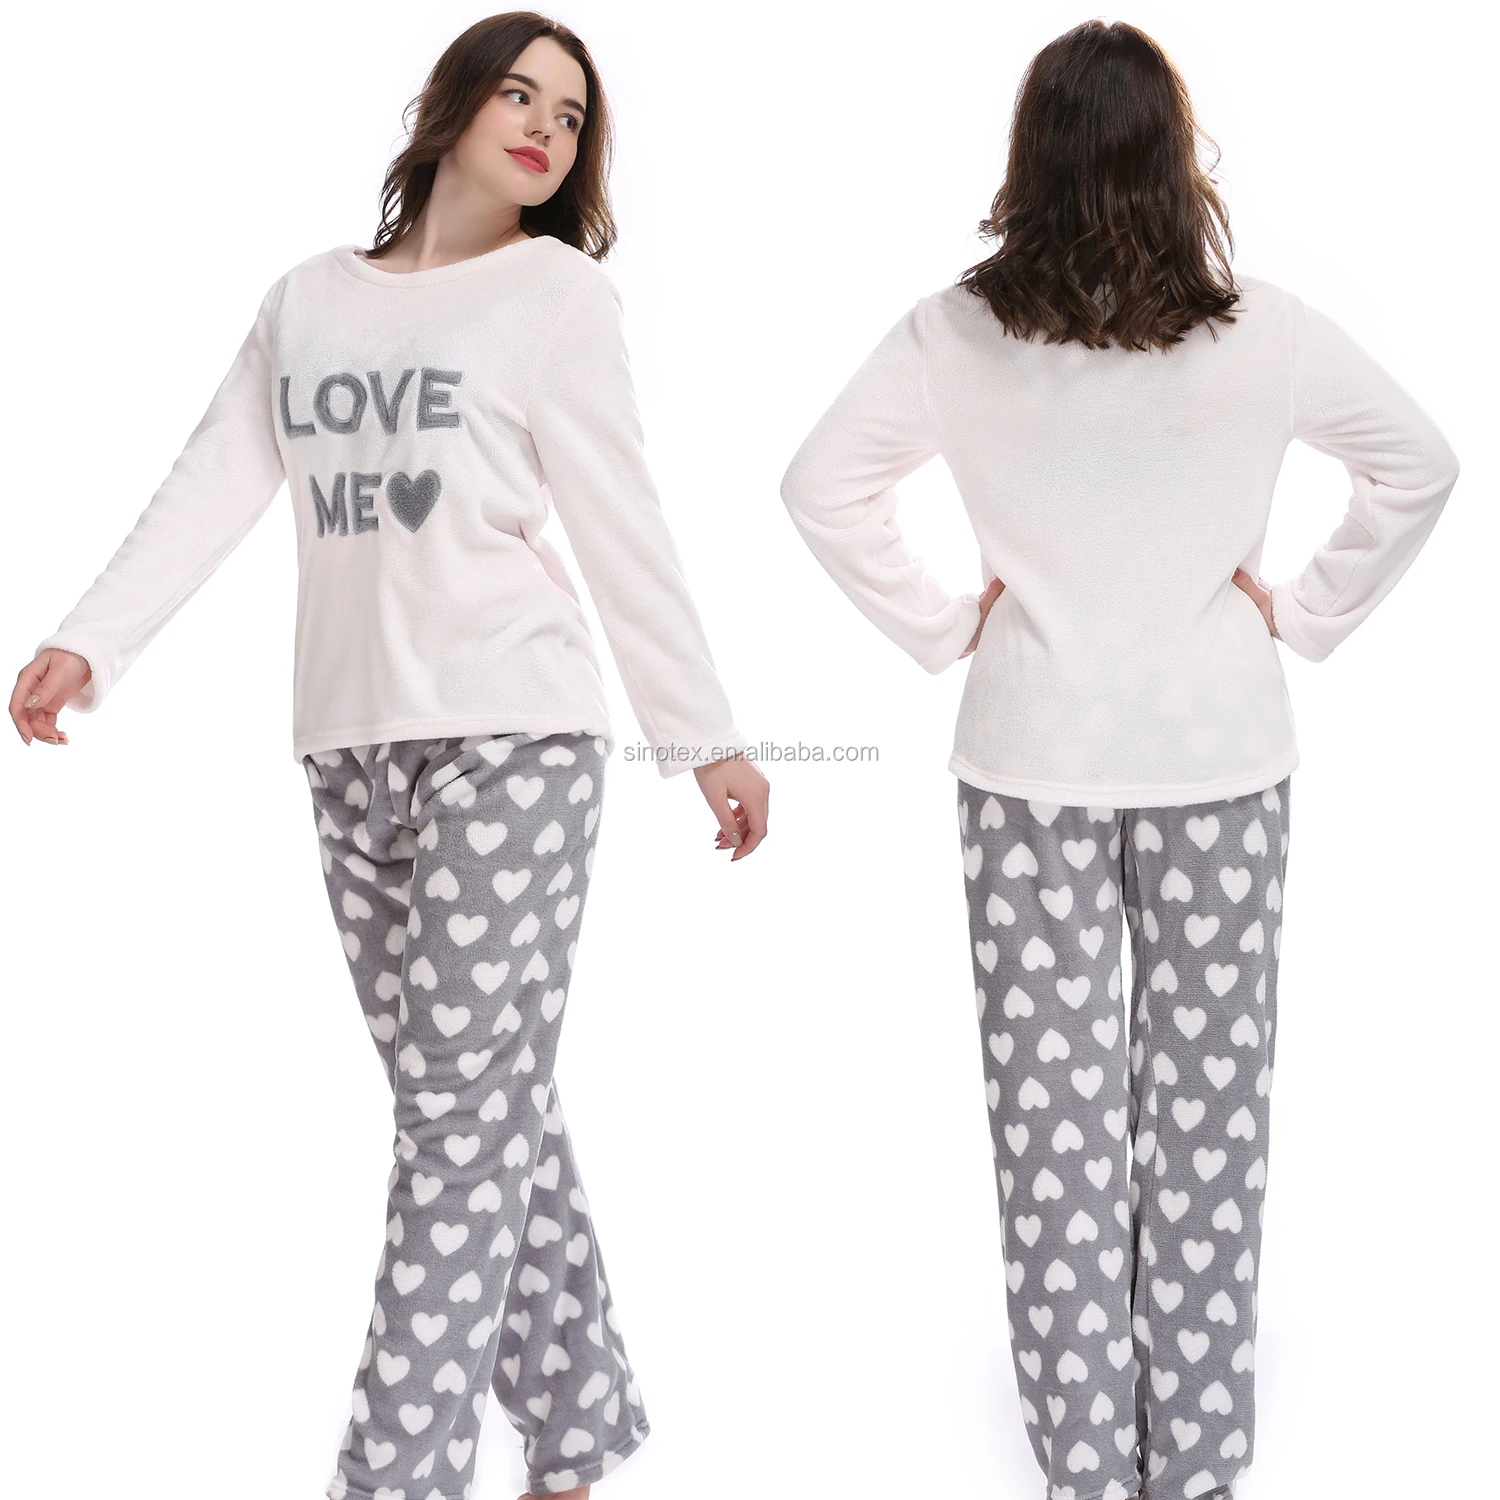 Image result for PHOTOS OF   women fall sleep wear&quot;